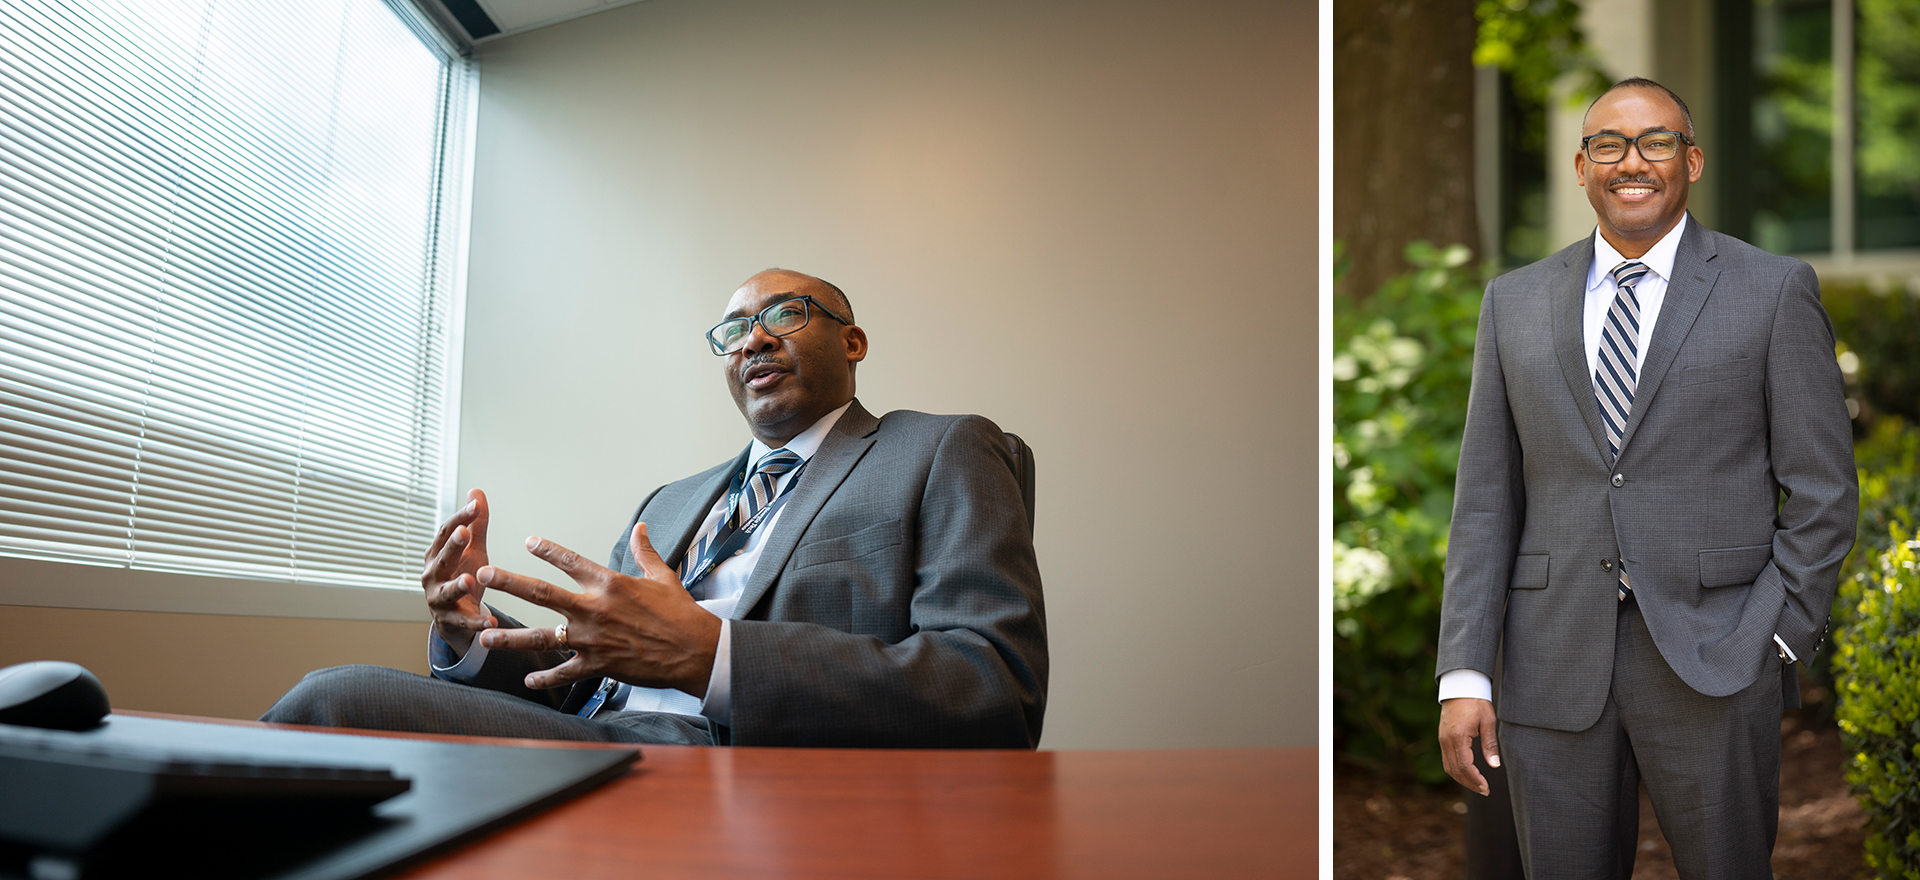 Two photos of William Robinson: left photo shows him sitting behind desk in office near large window, right photo shows him standing outdoors in front of lush greenery